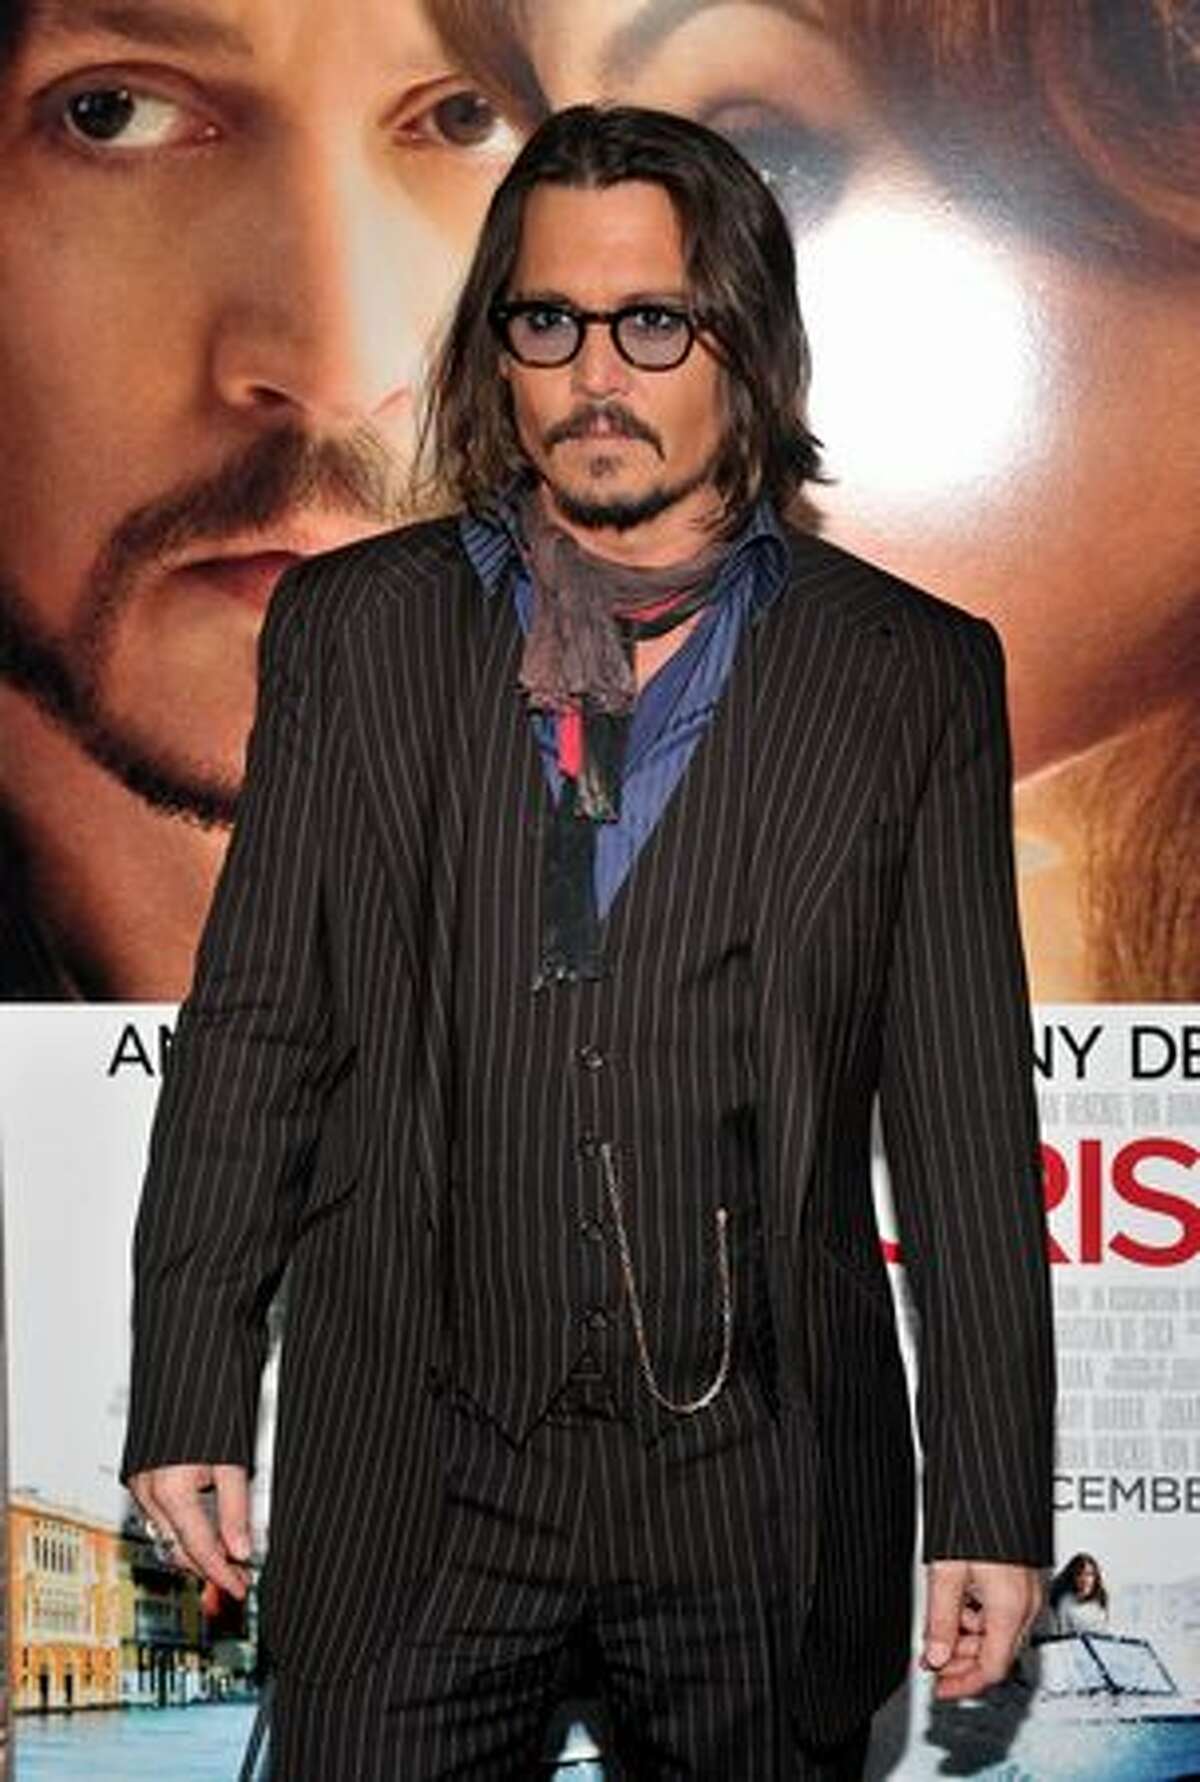 Actor Johnny Depp attends the World premiere of "The Tourist" at Ziegfeld Theatre in New York, New York.